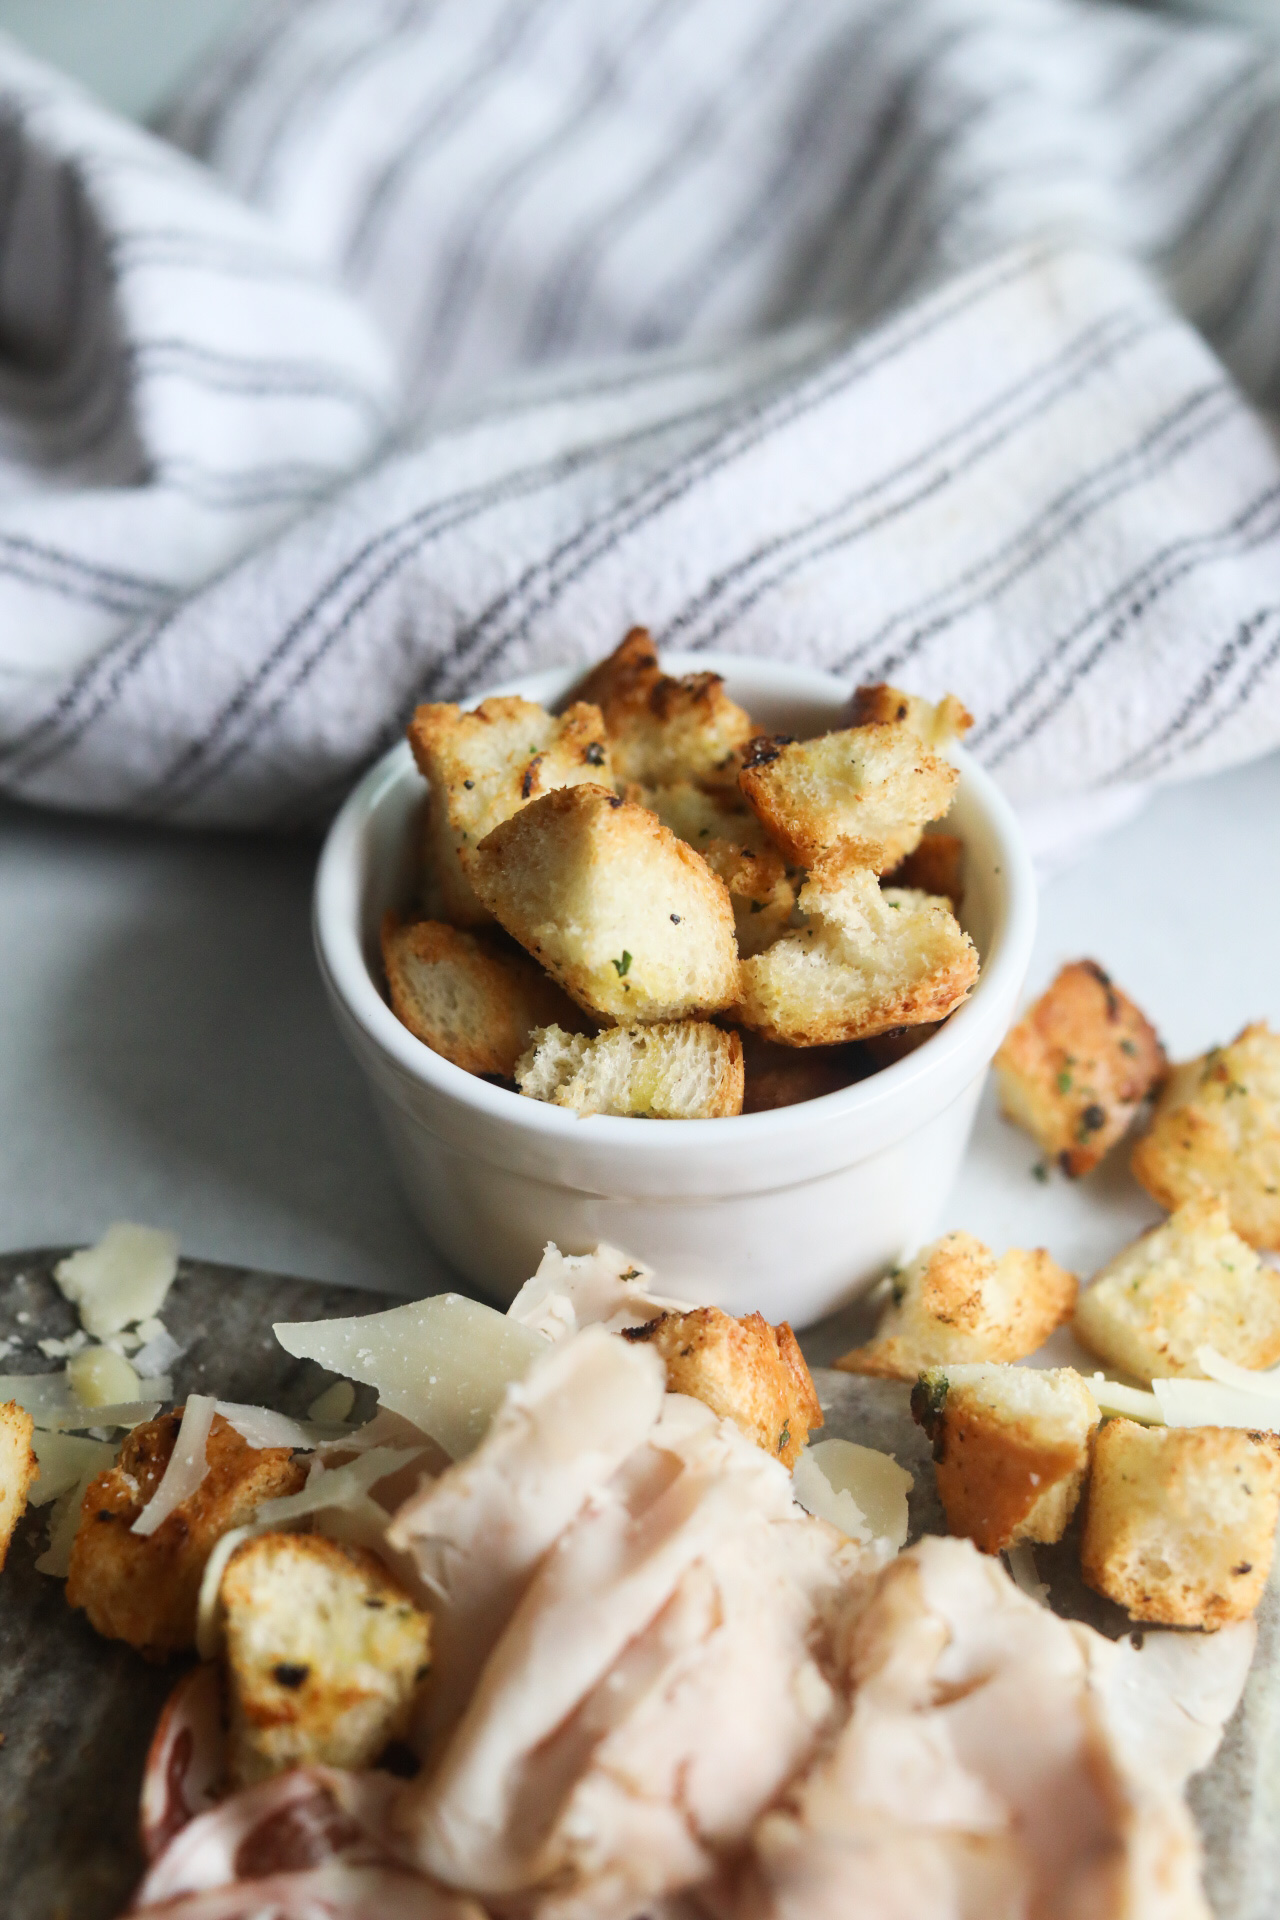 Final recipe image of baked croutons served in a small white bowl.